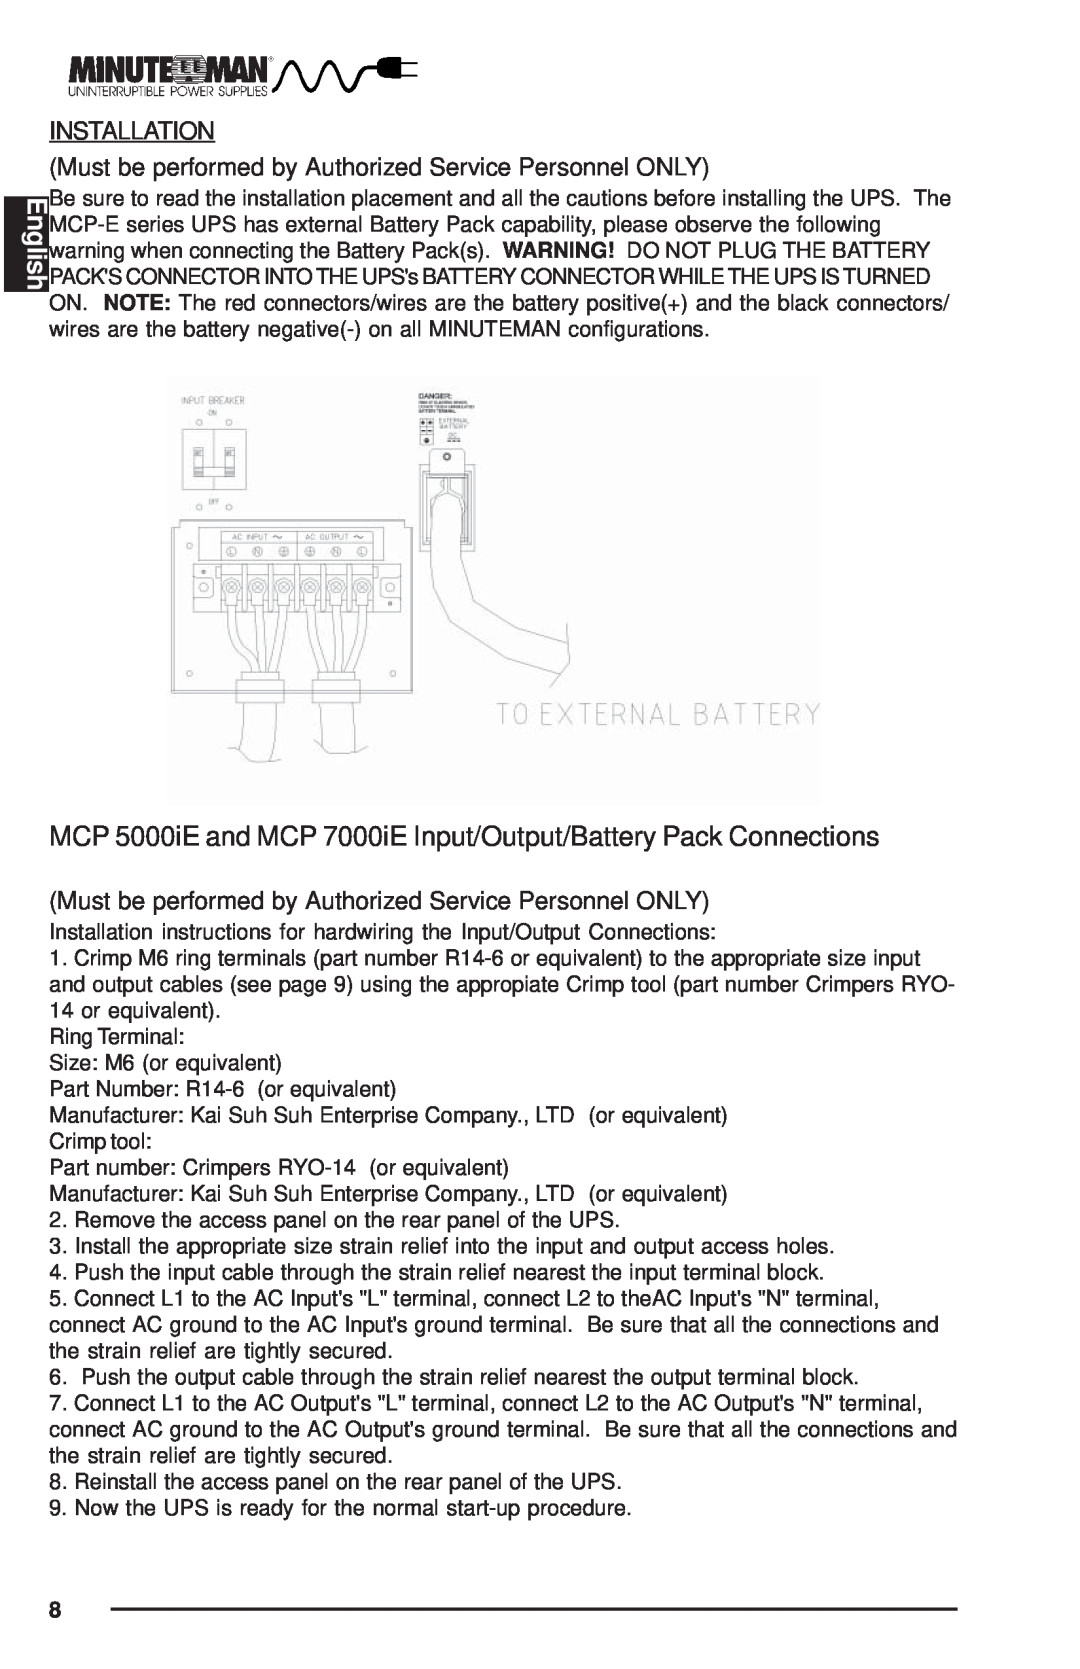 Minuteman UPS MCP-E user manual English, MCP 5000iE and MCP 7000iE Input/Output/Battery Pack Connections 